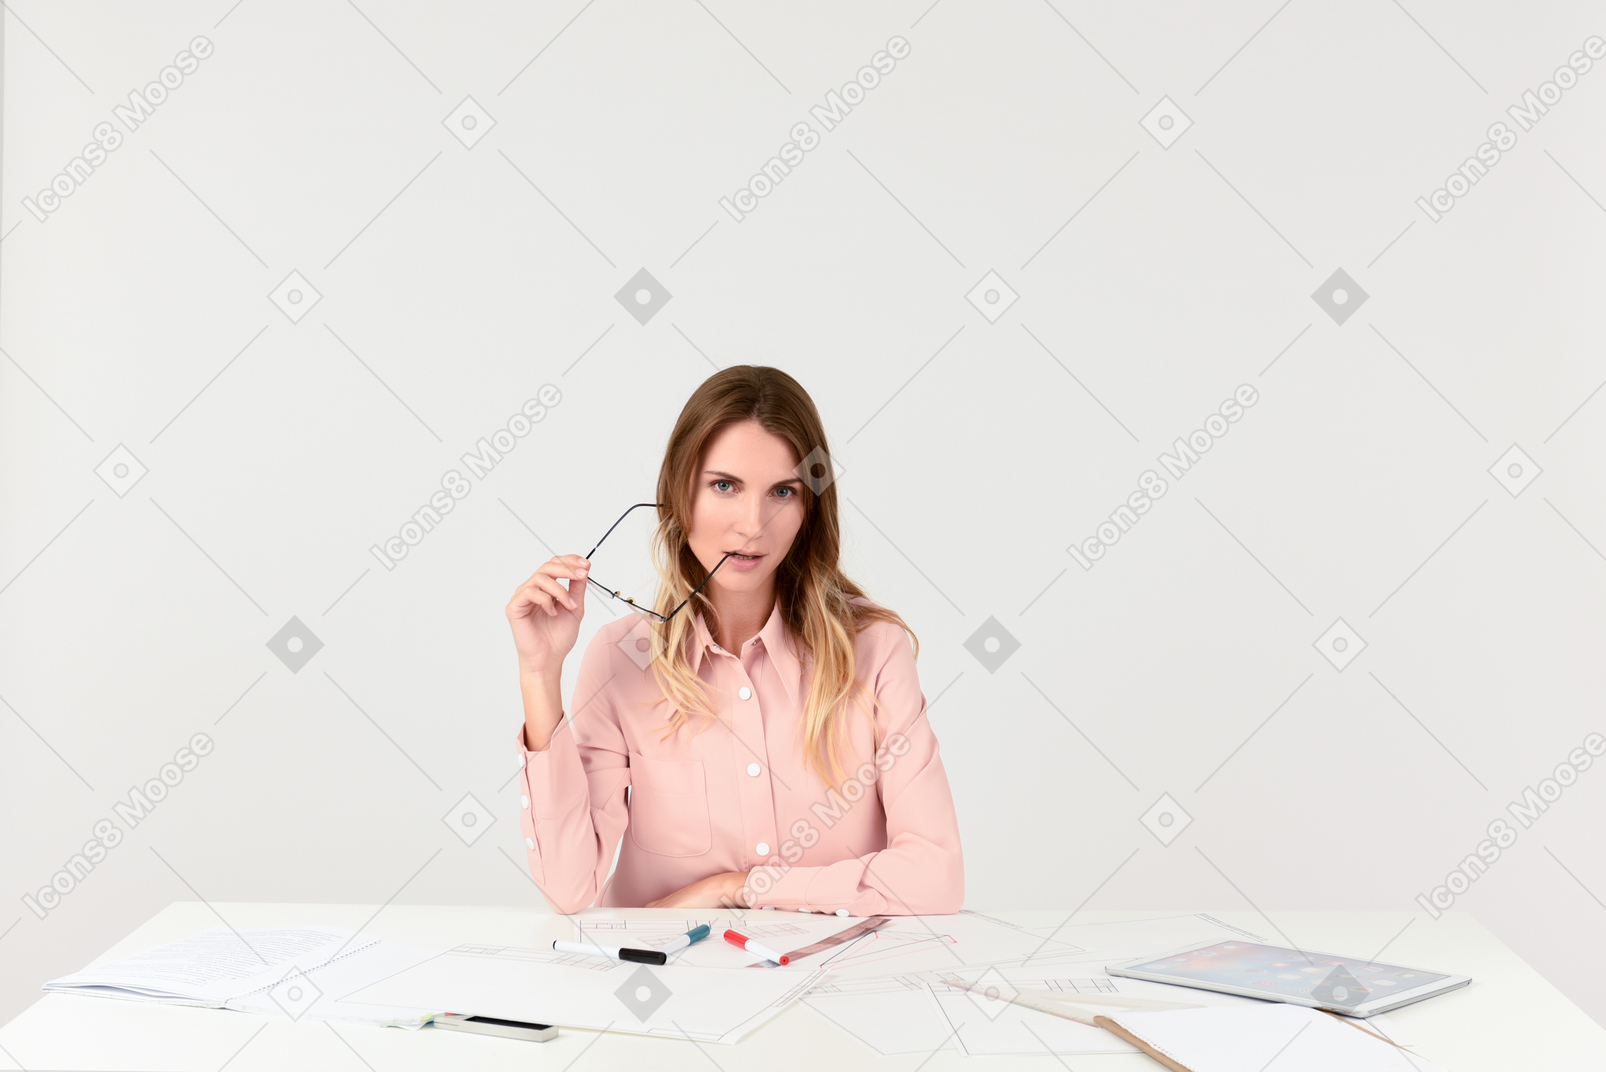 Female architect sitting at the table and bitting her eyeglasses